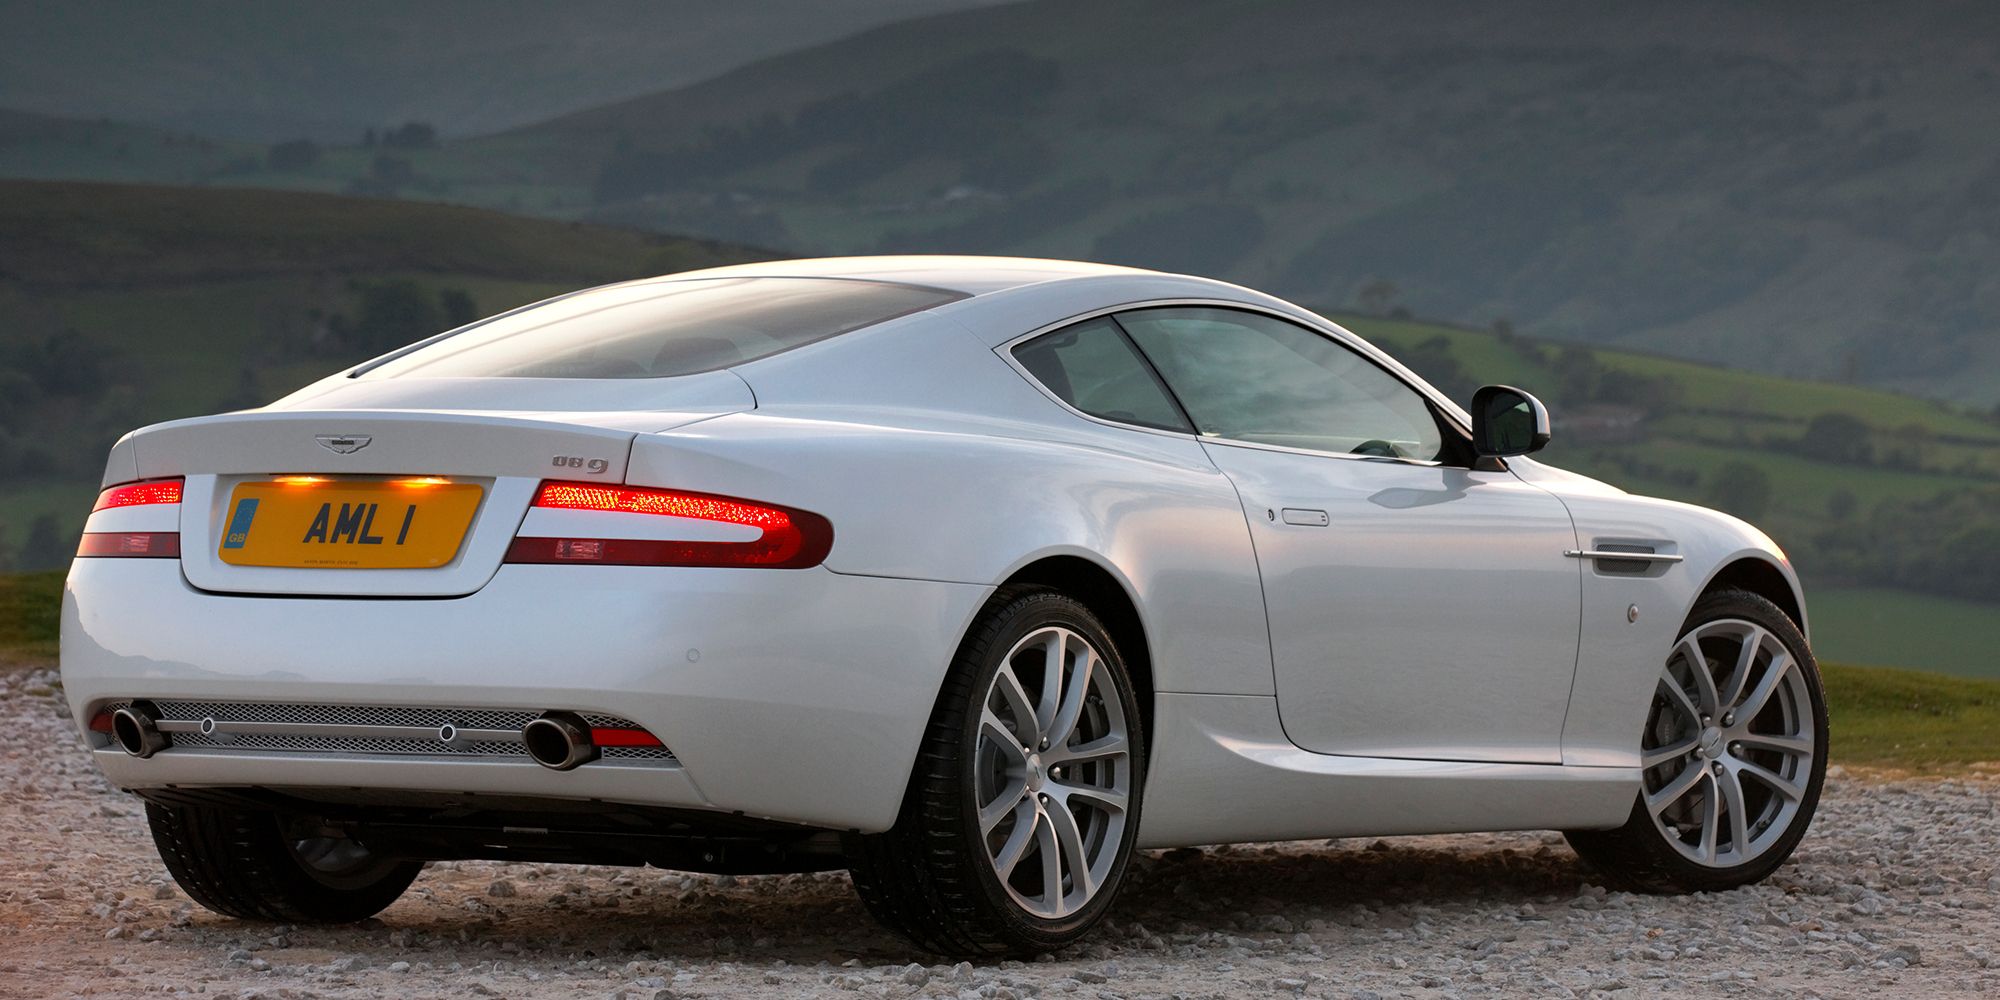 The rear of a white DB9 on the move